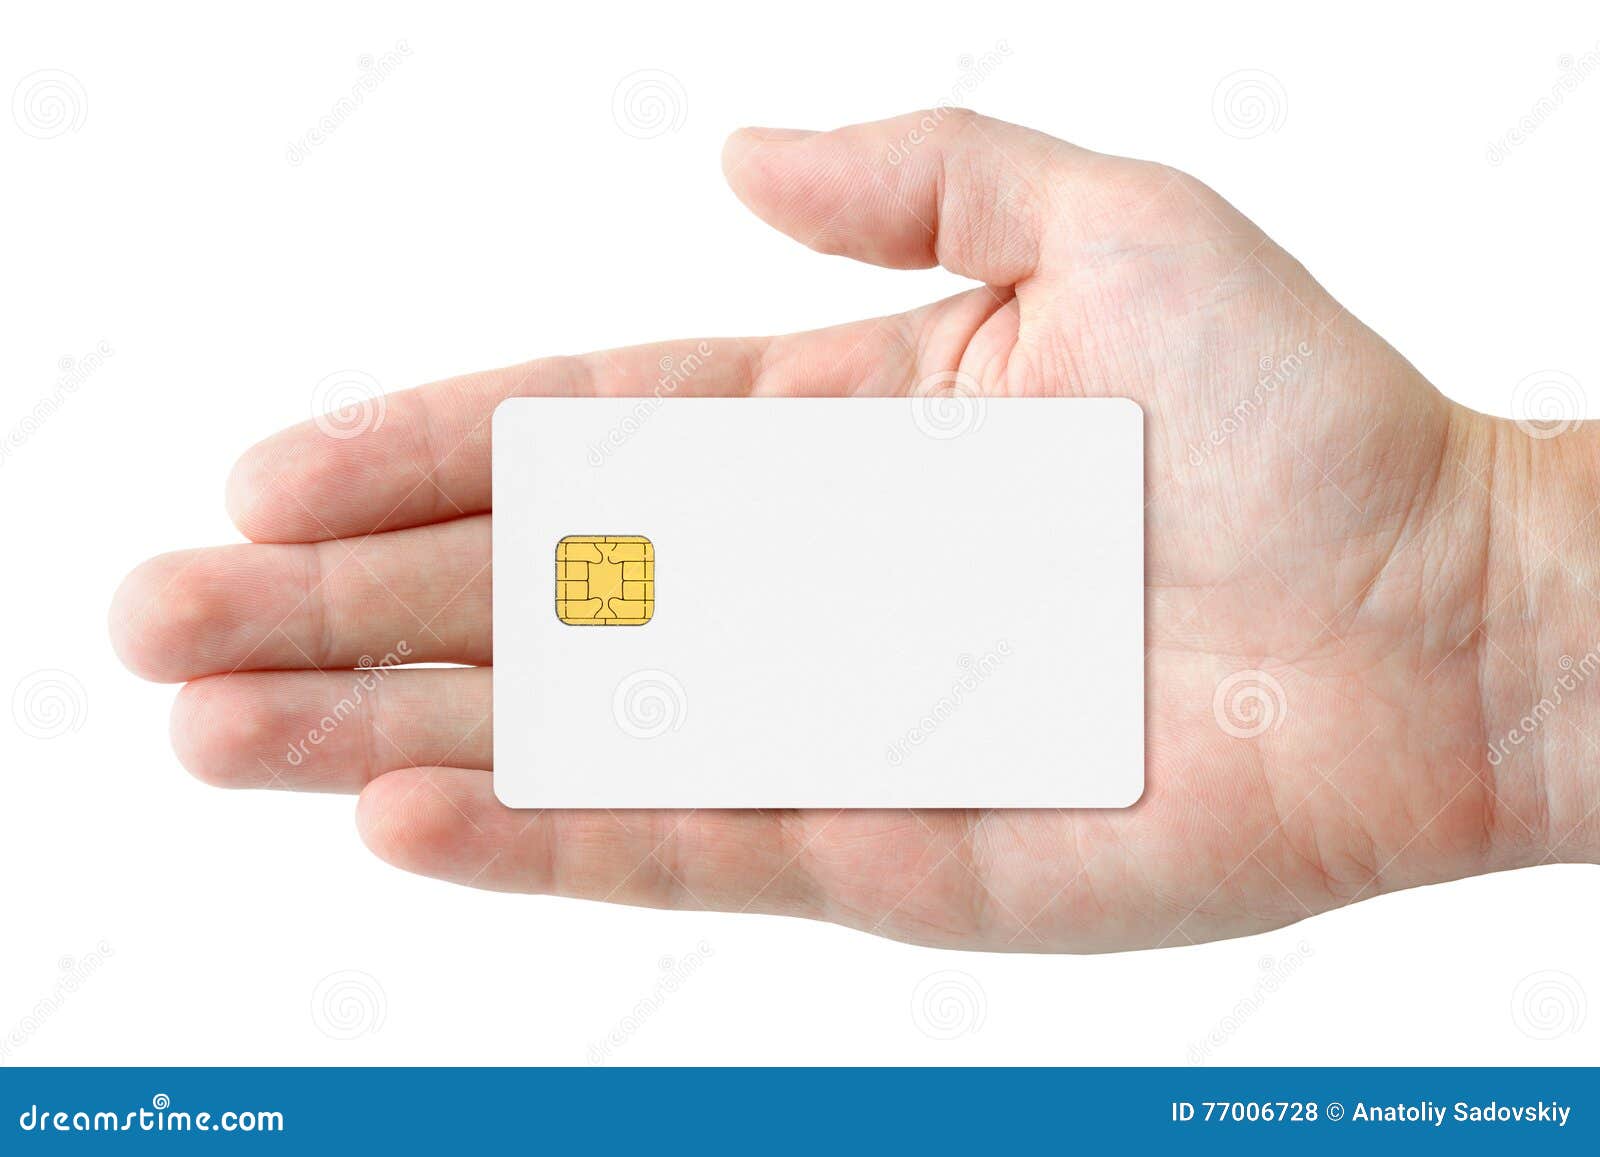 What Is Blank Credit Card